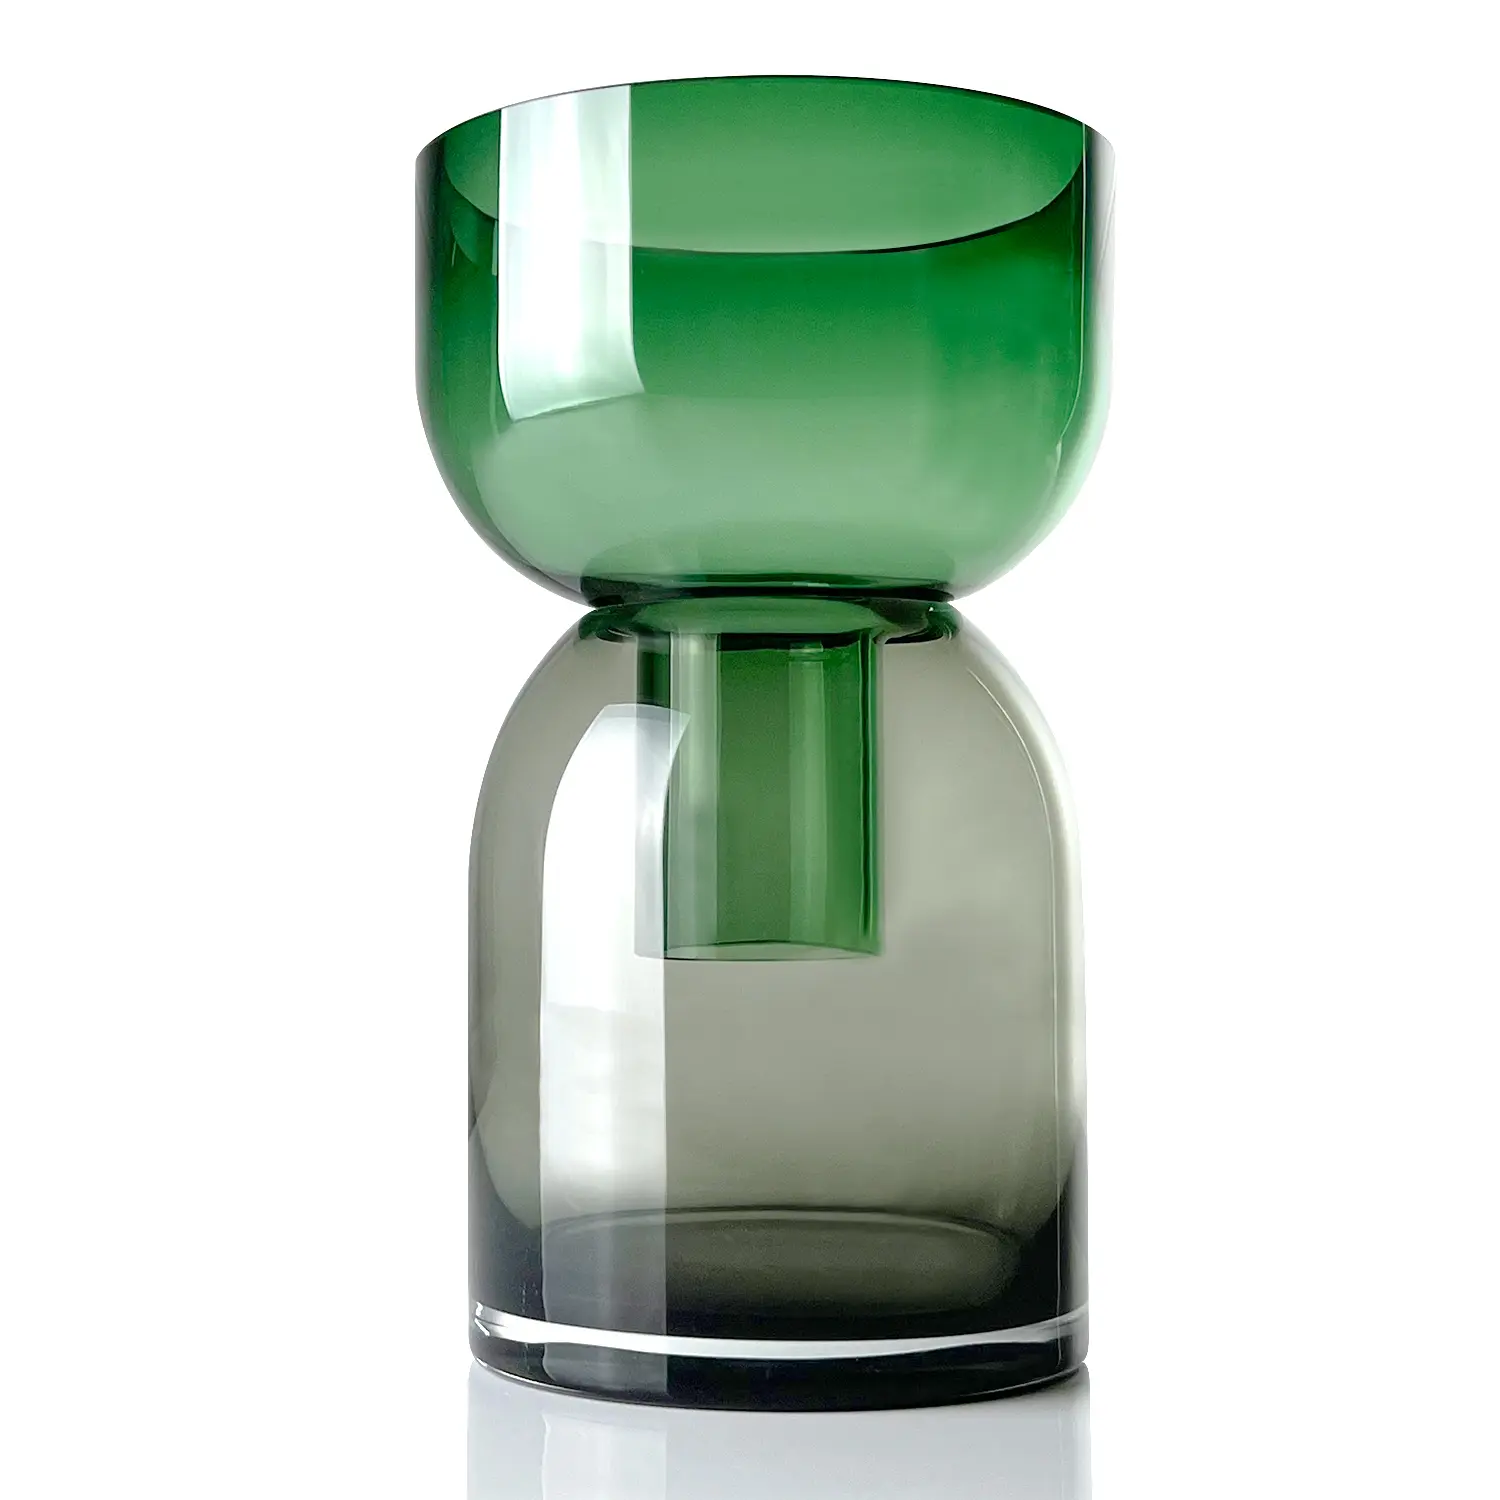 Flip Vase Grey and Green - Small